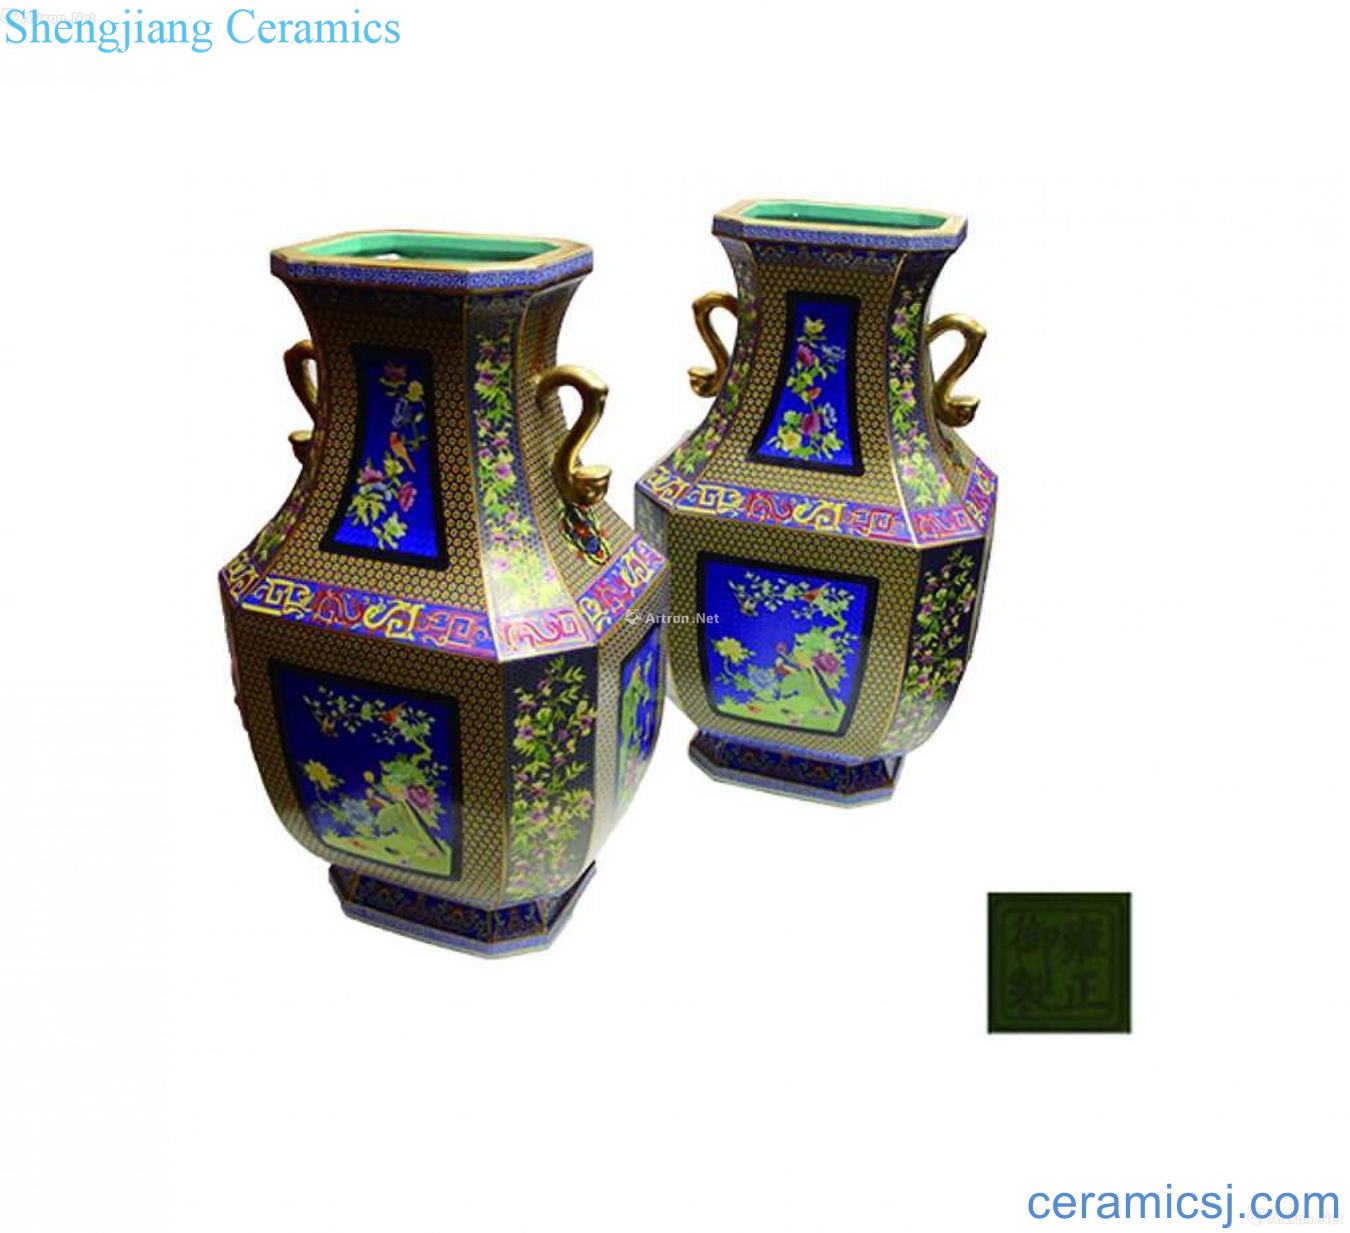 The colour kam to medallion flower-and-bird enamel sifang Angle of bottle